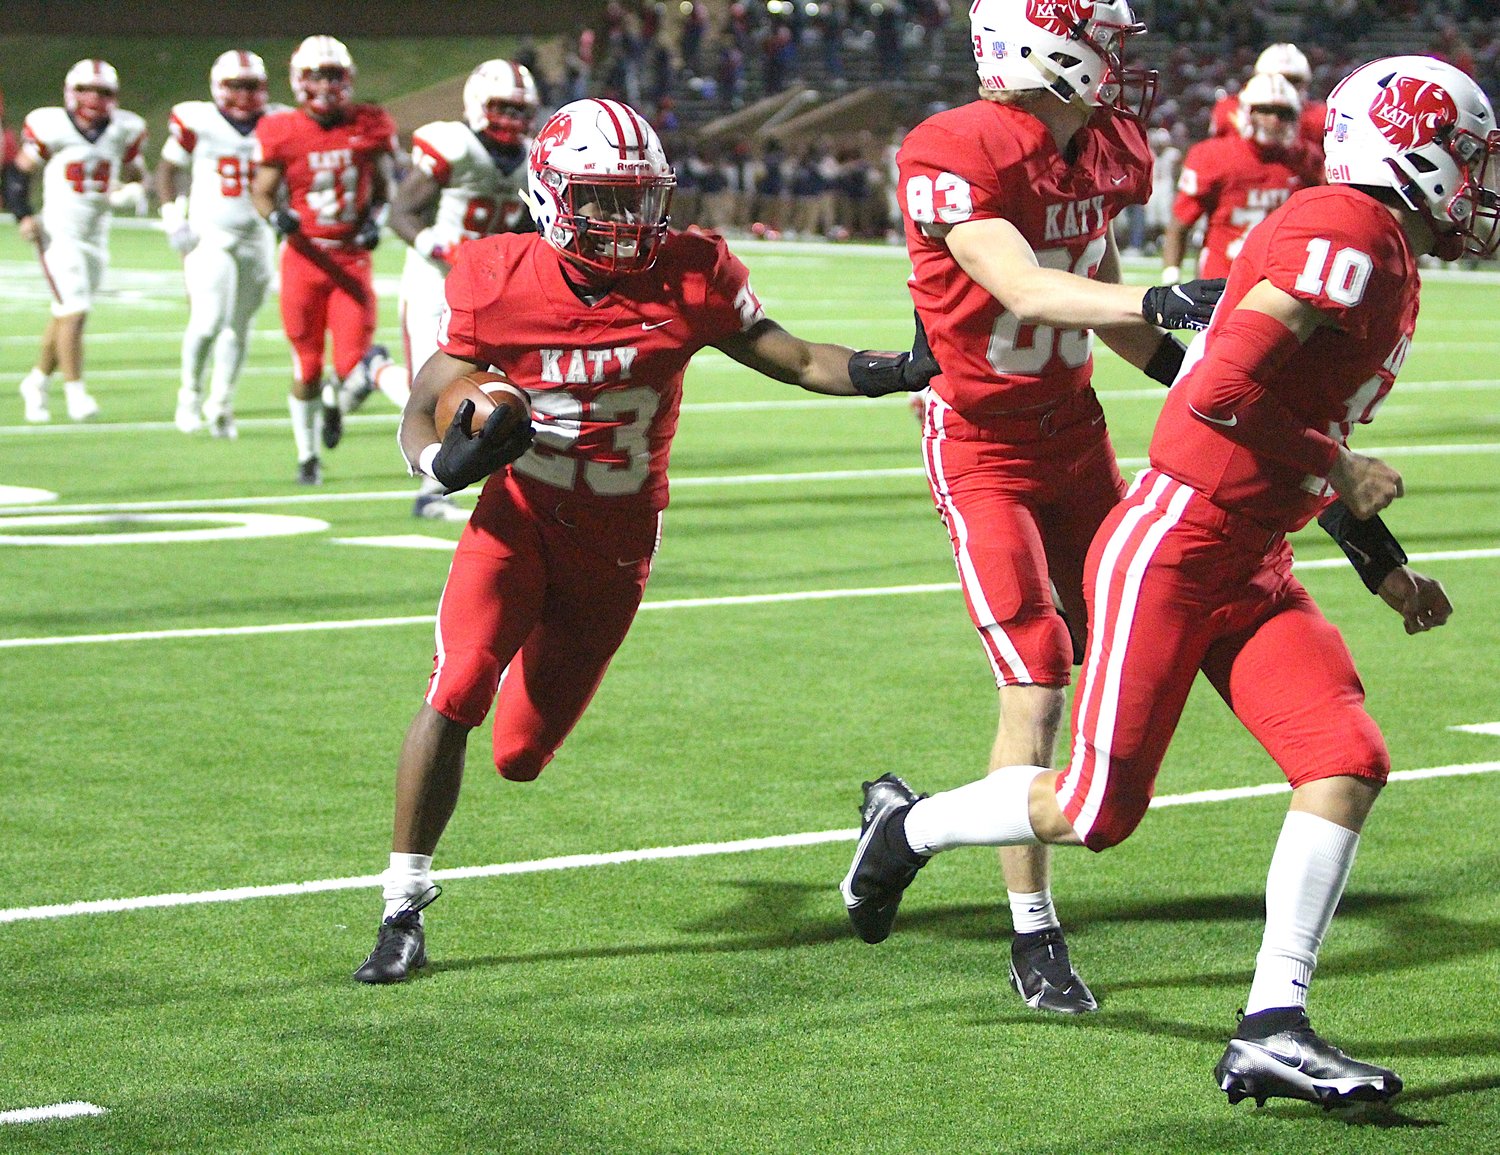 Katy running back Seth Davis runs for one of his two touchdowns during Katy's 6A D2 area playoff win over Lamar at Rhodes Stadium last season.